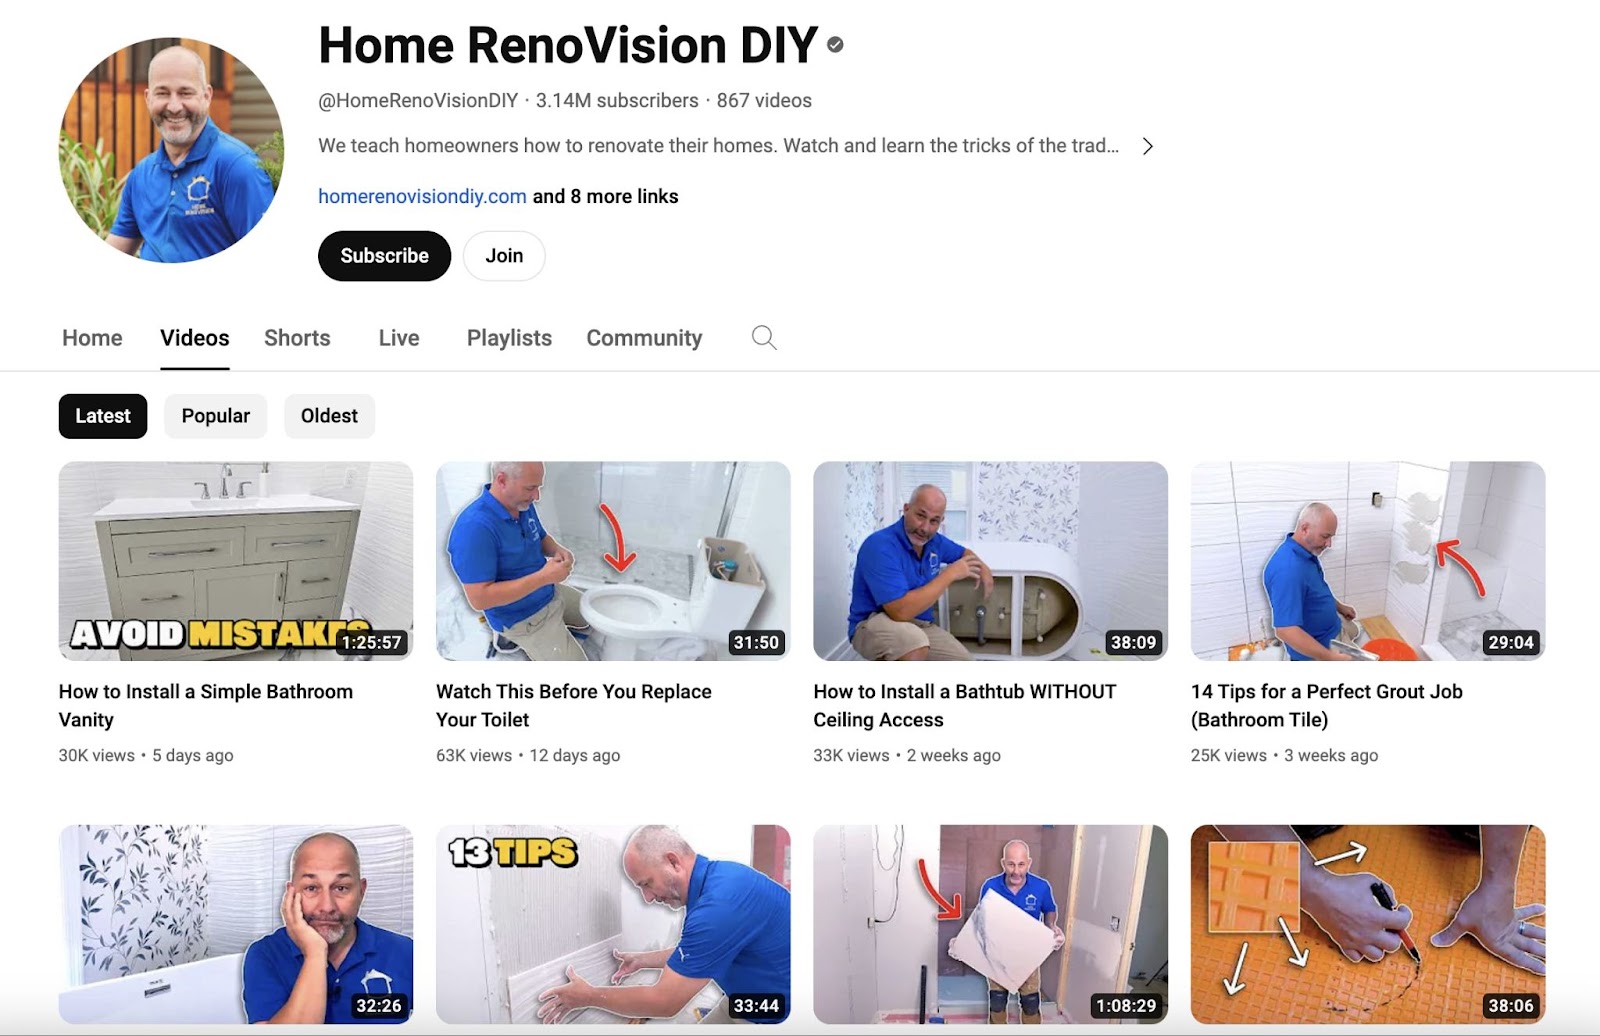 Home RenoVision DIY YouTube channel.